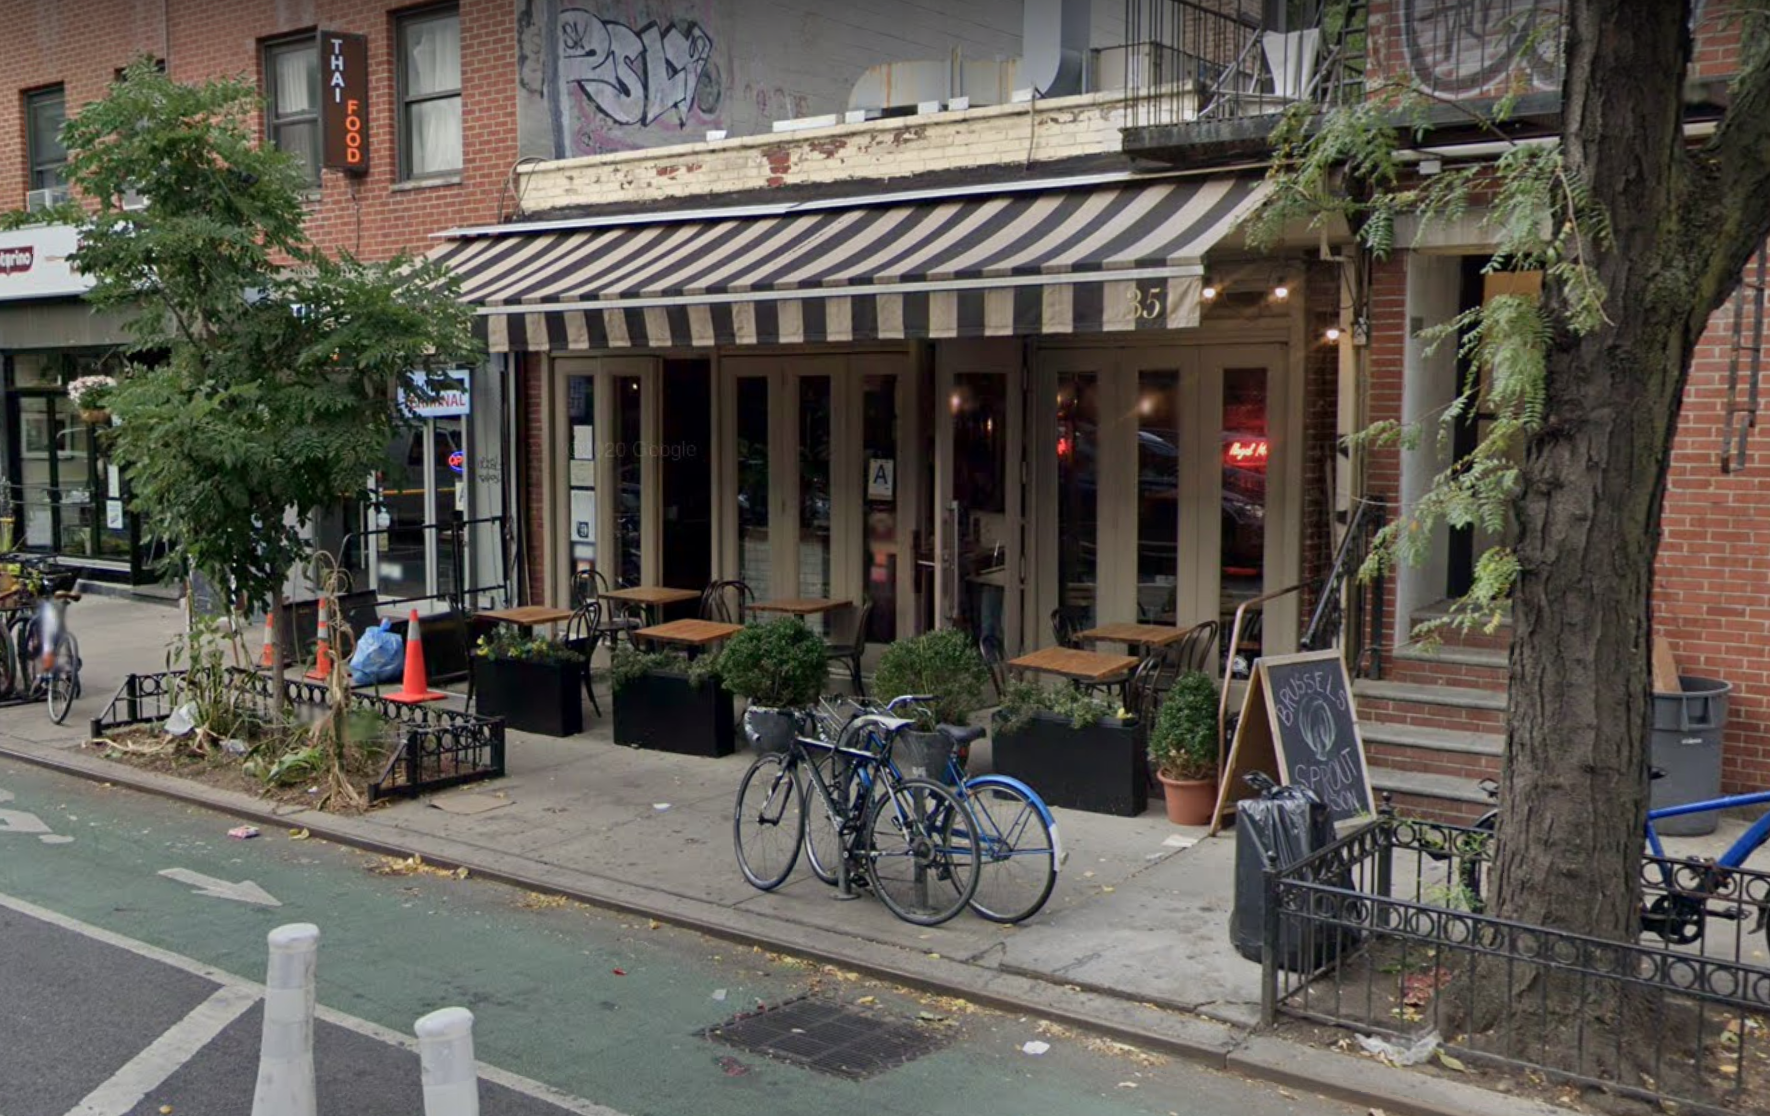 A bike lane runs along a sidewalk in front of a restaurant, where a striped black and white awning hangs over a small outdoor dining area